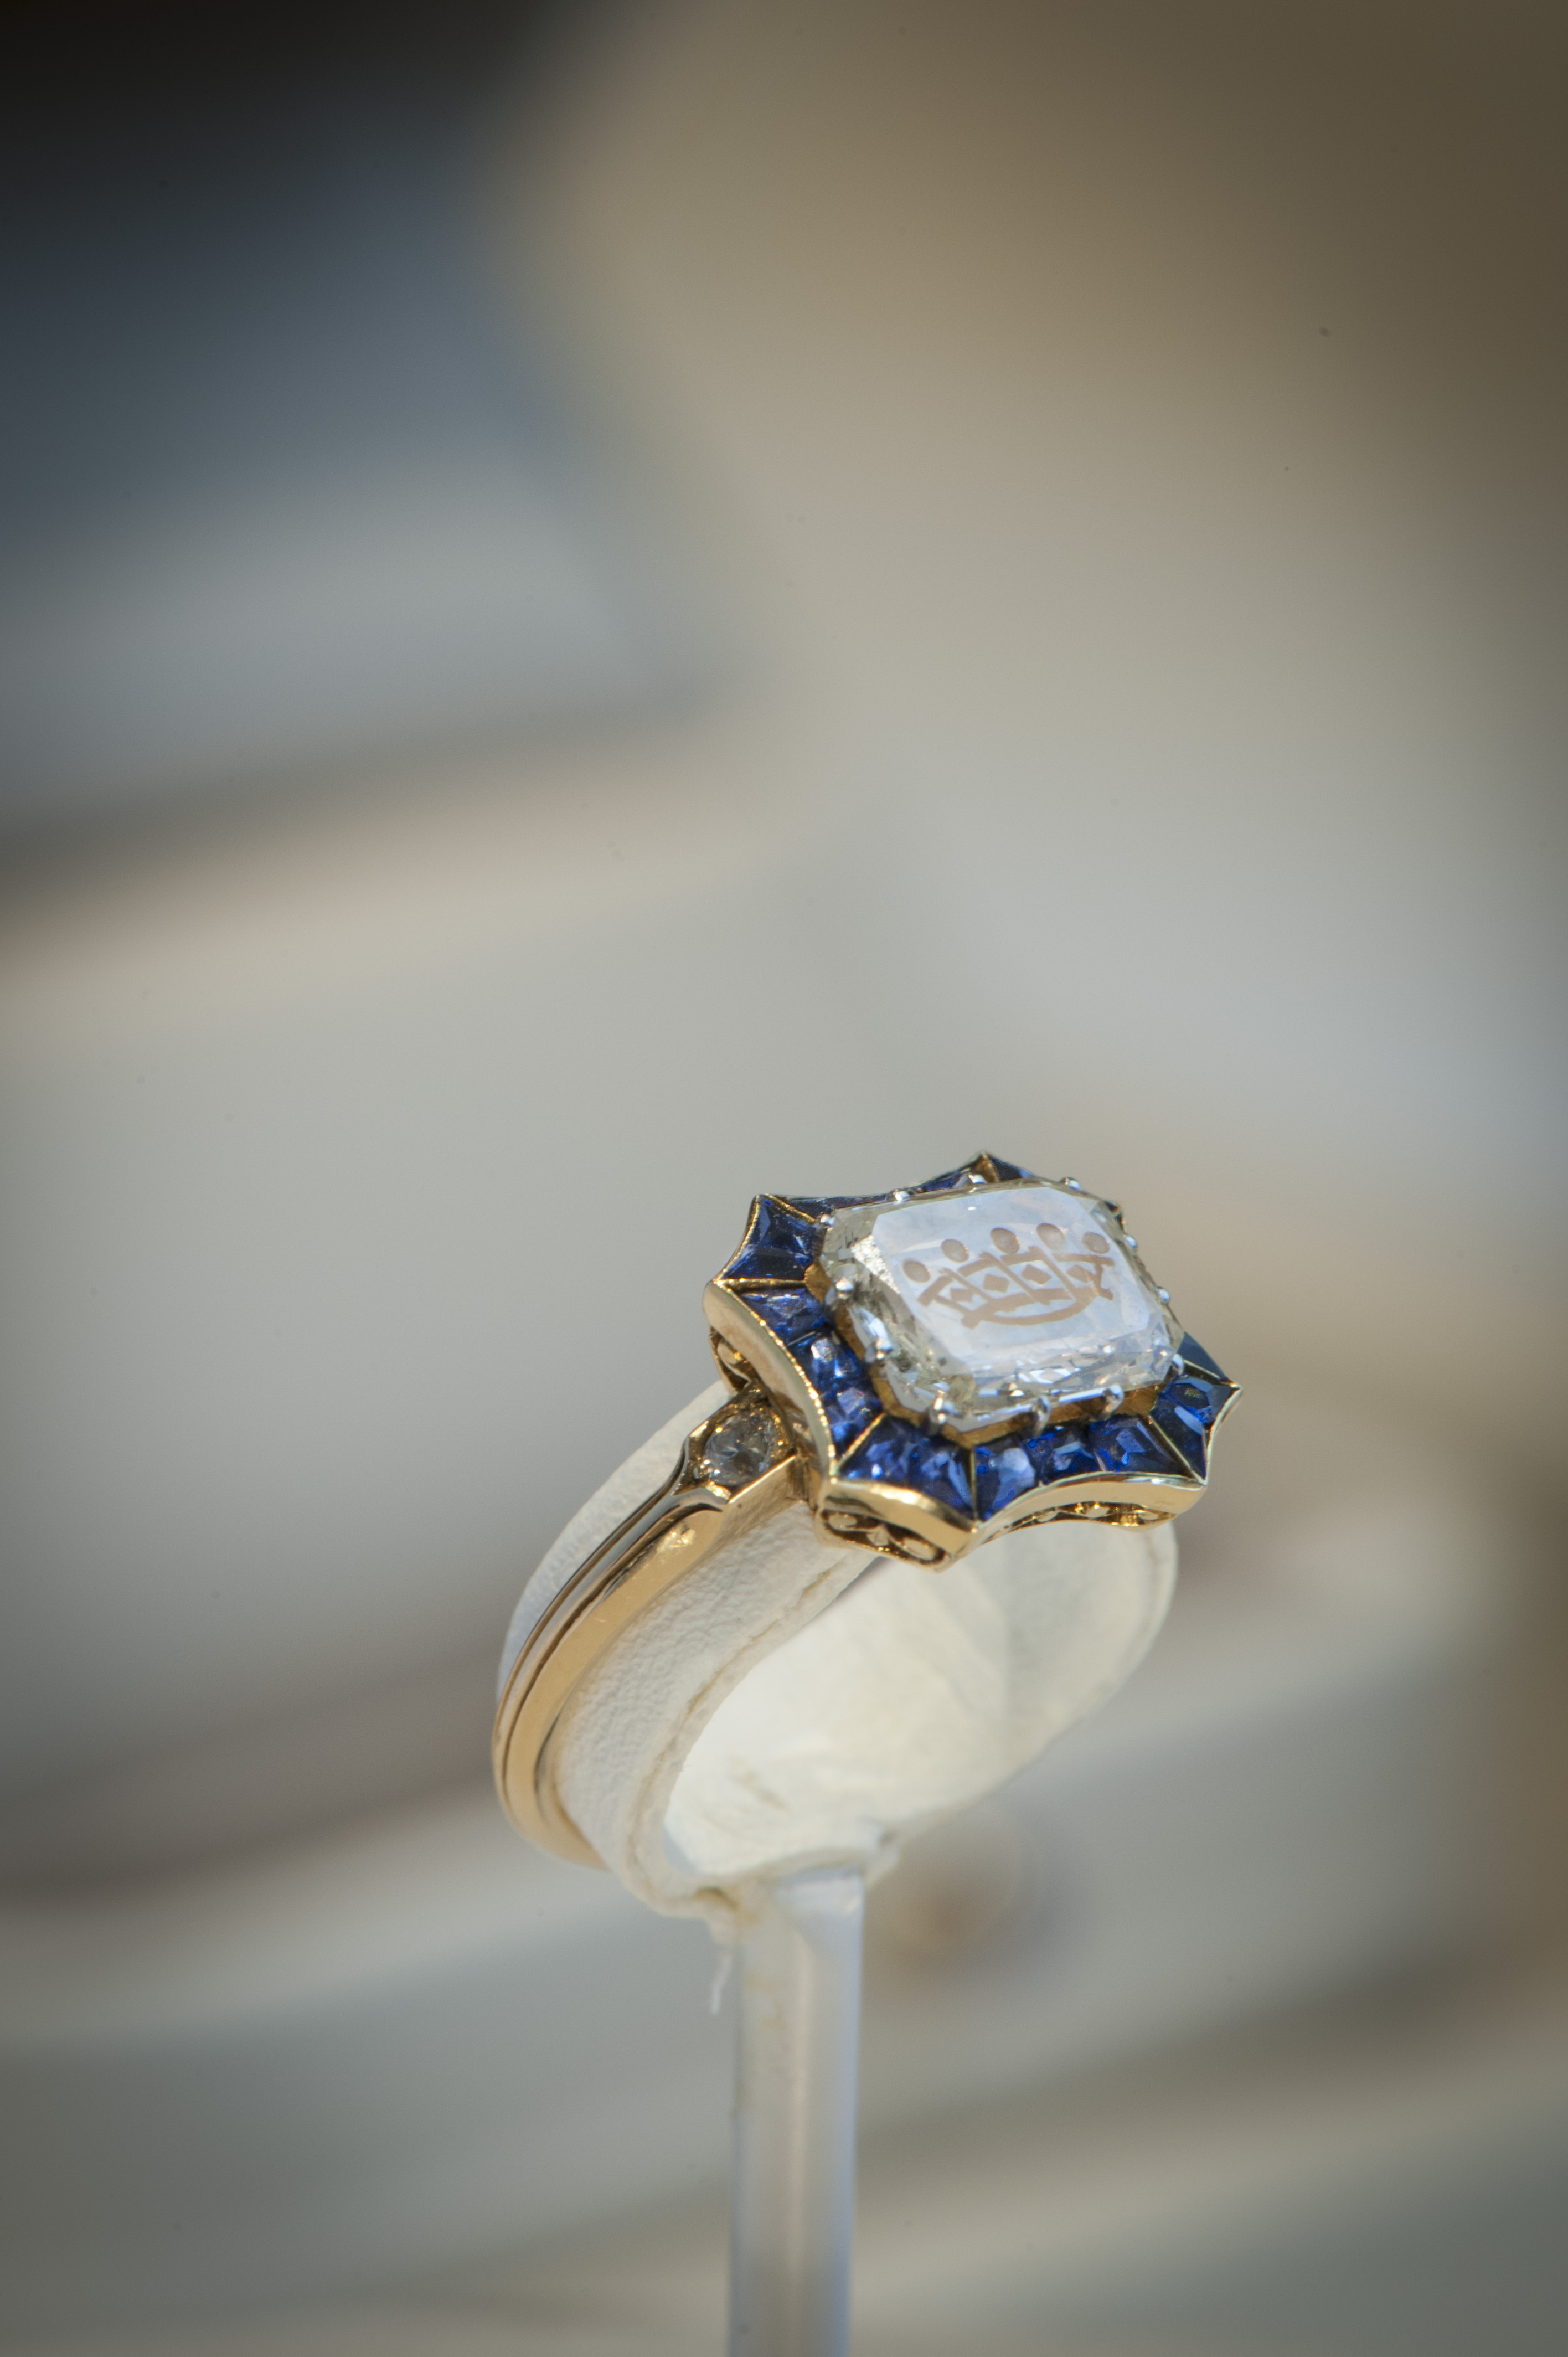 Gold ring with baron crown engraved on diamond (1)